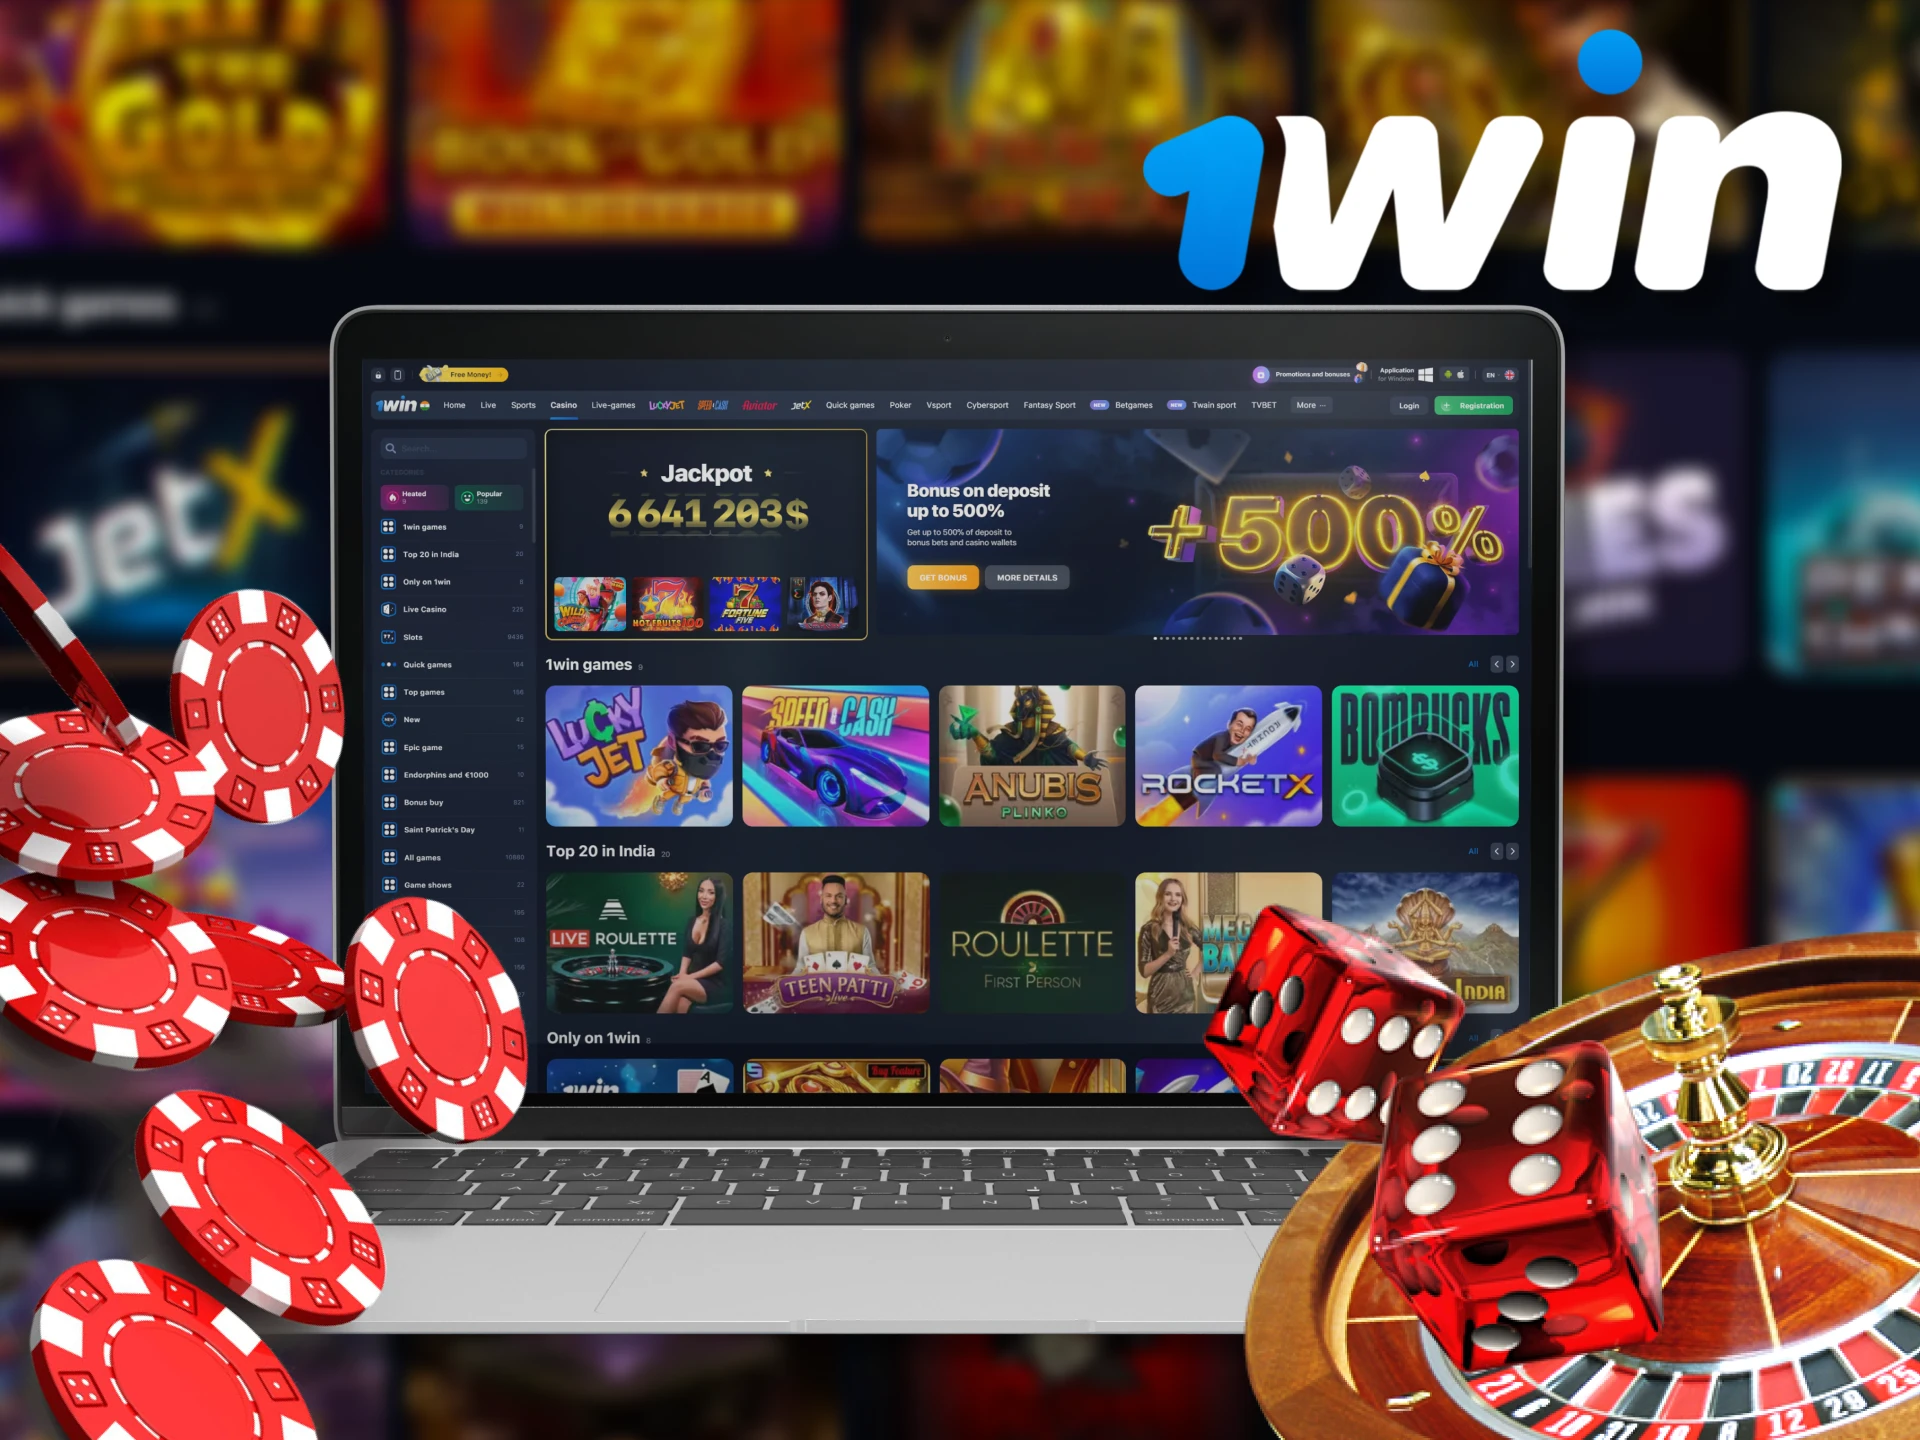 Register and make a deposit to start playing 1win casino games.